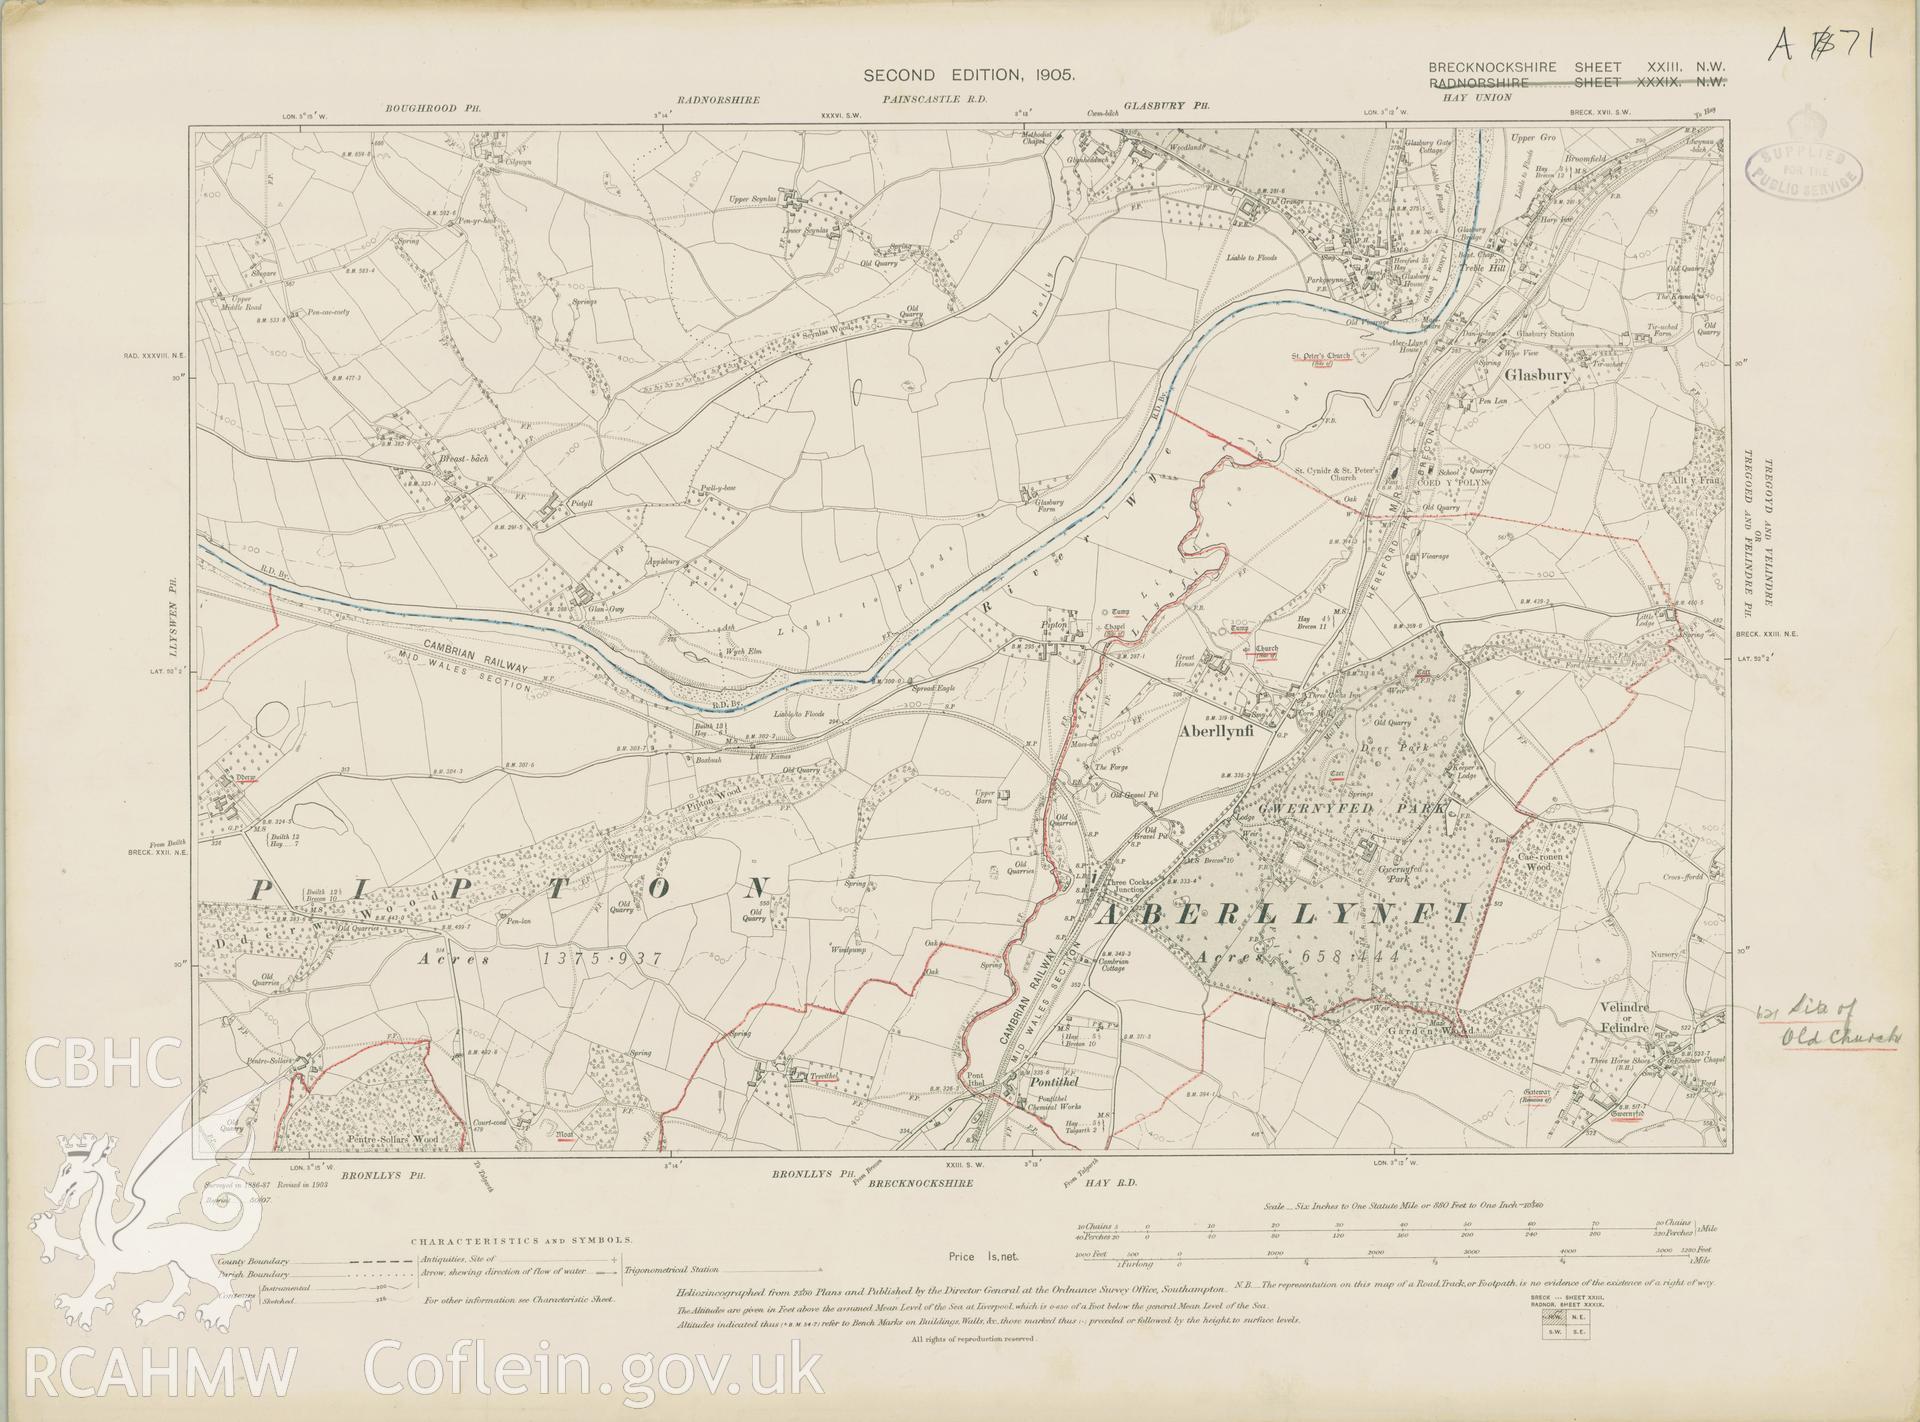 Ordnance Survey  6" second edition 1905 map showing the area to the south-west of Glasbury.